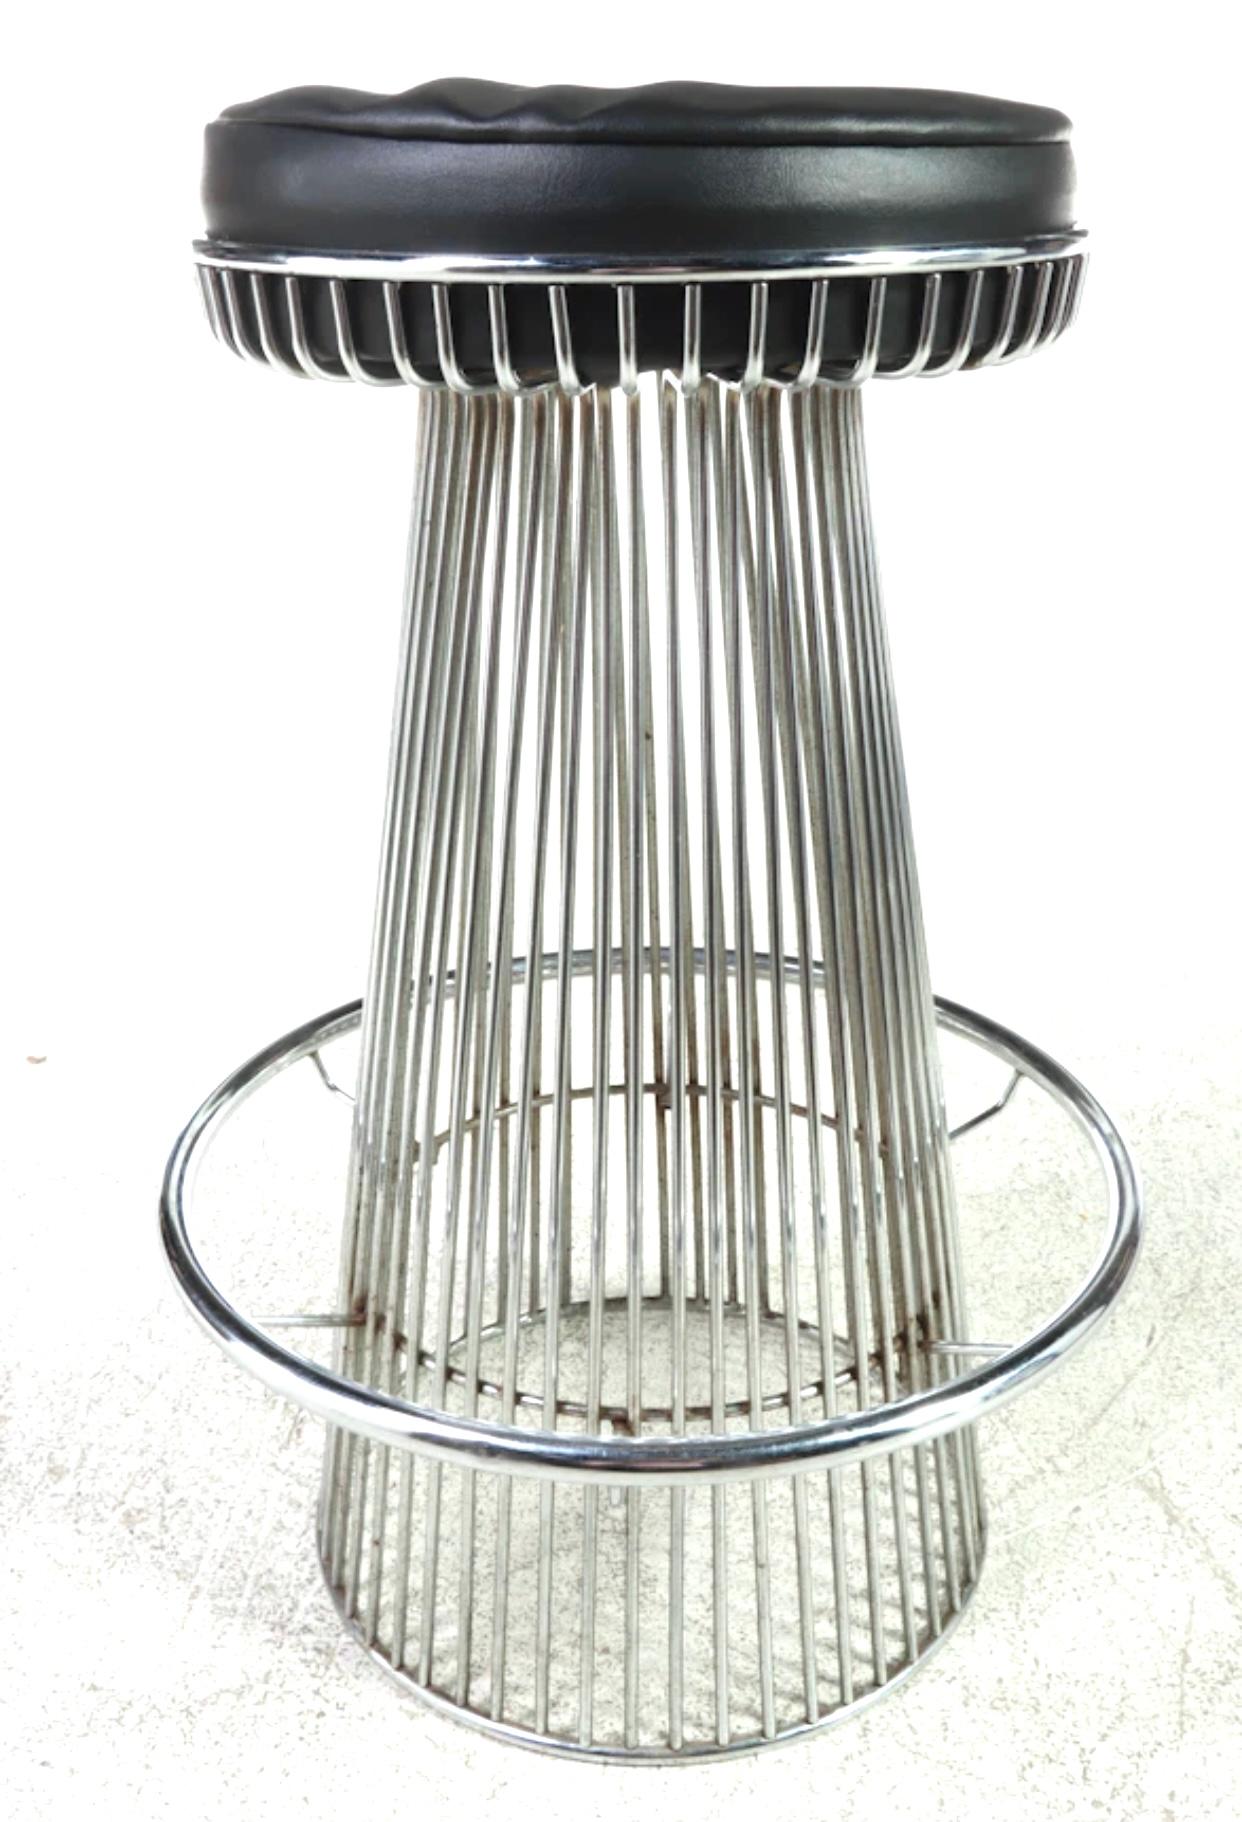 Rare Pair of Arthur Umanoff Chrome Stools for Contemporary Shells In Good Condition For Sale In Chicago, IL